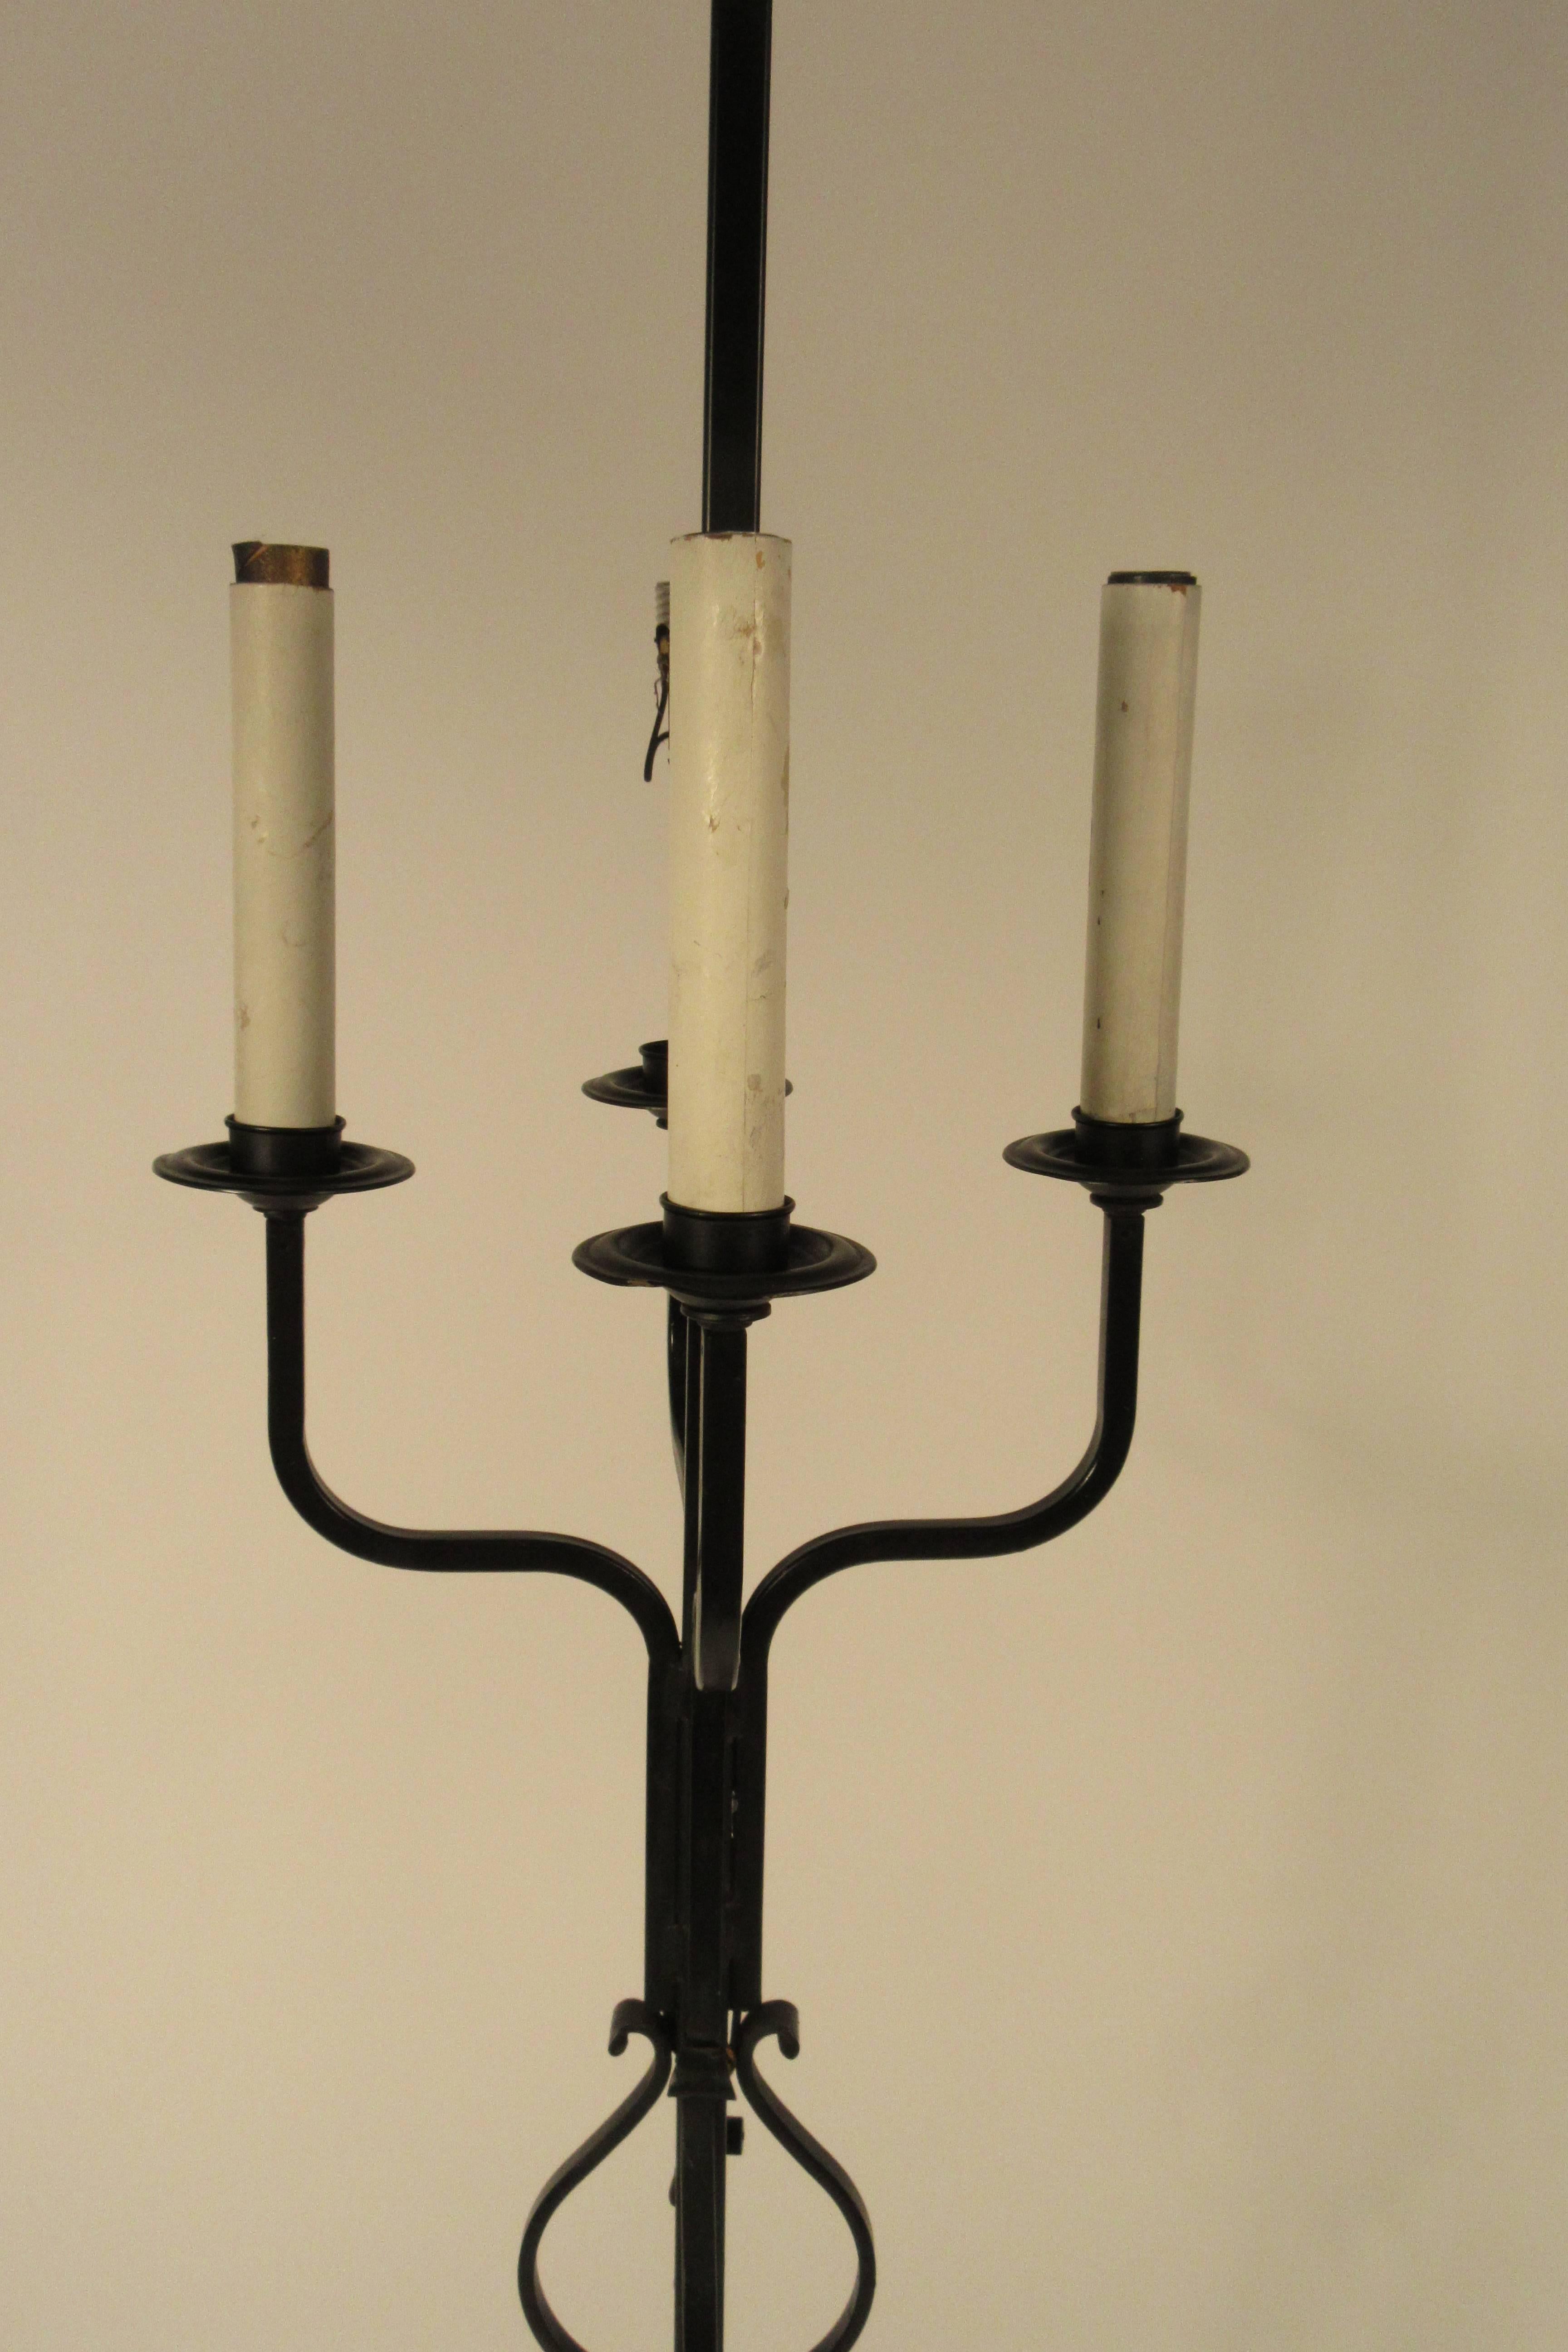 1970s Iron Floor Lamp In Good Condition For Sale In Tarrytown, NY